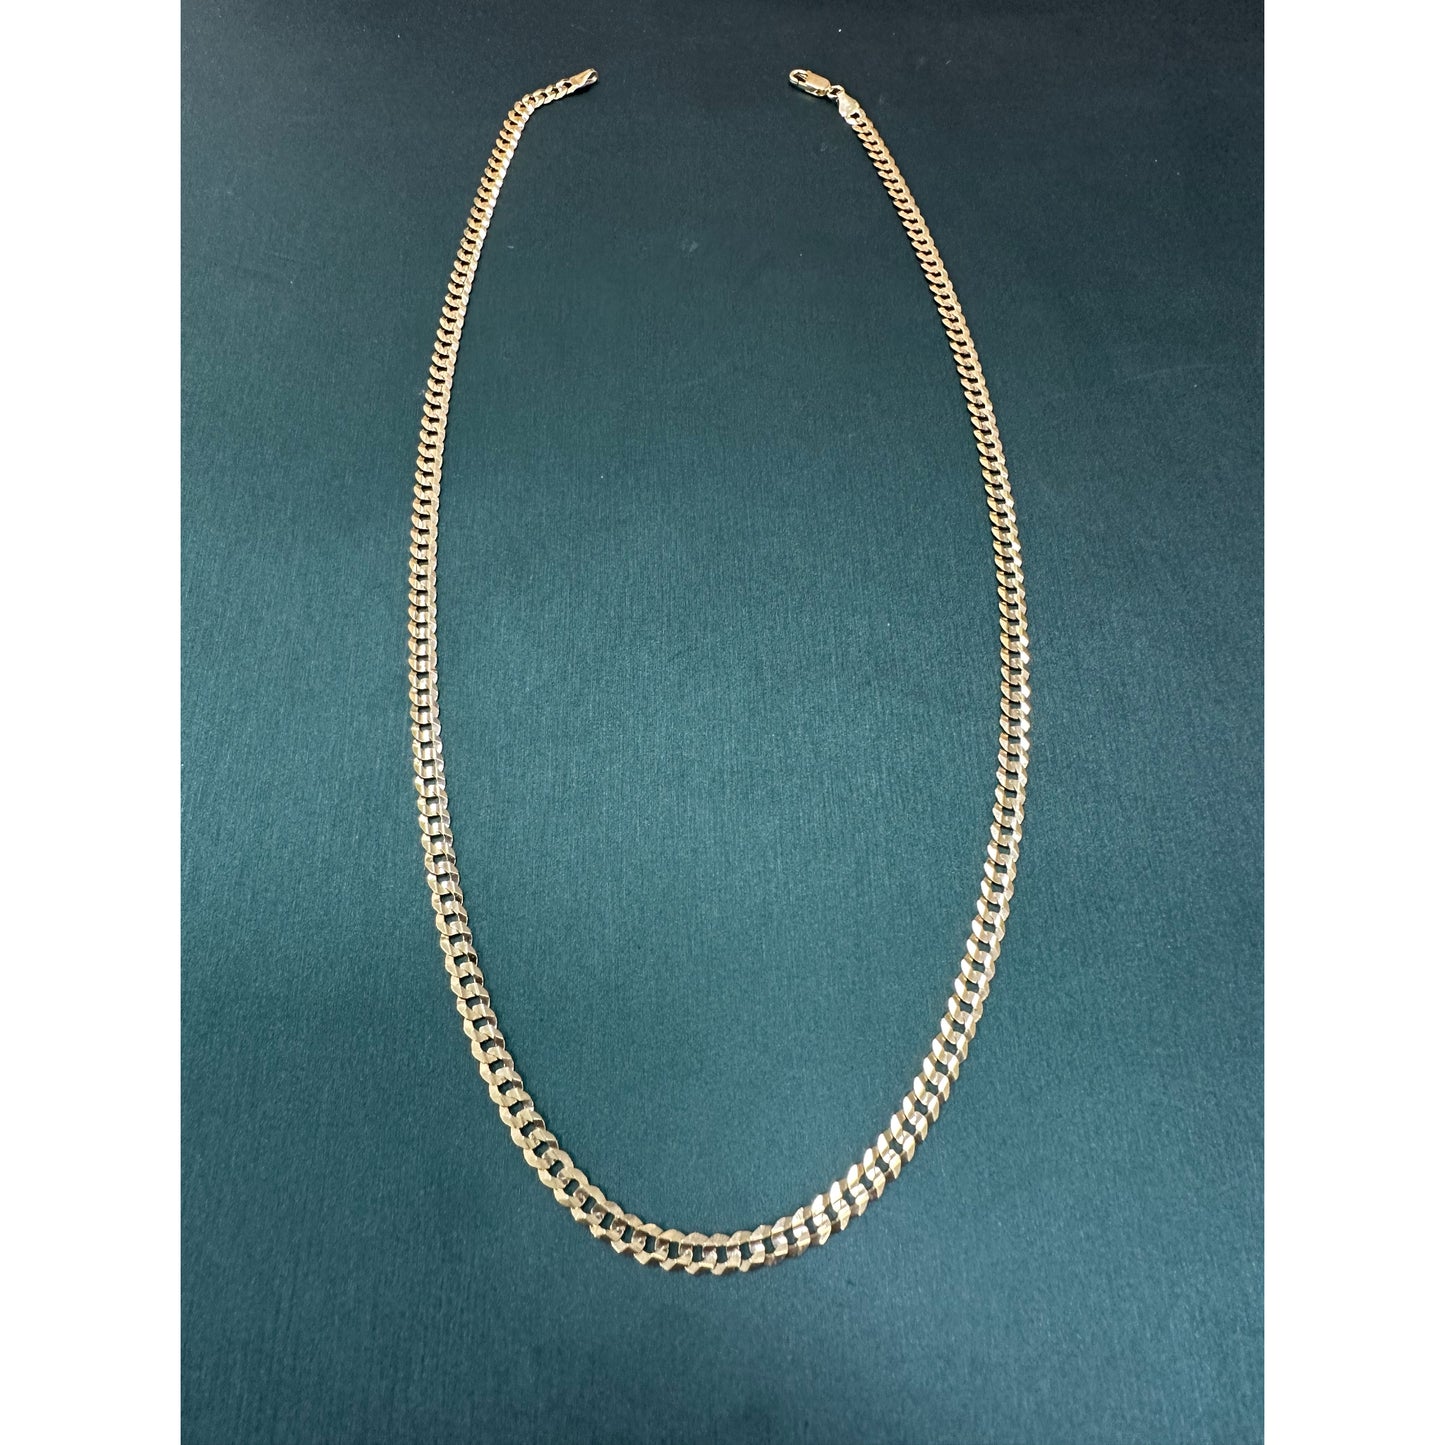 Curb Link Chain 5.0mm 22 inches 14k